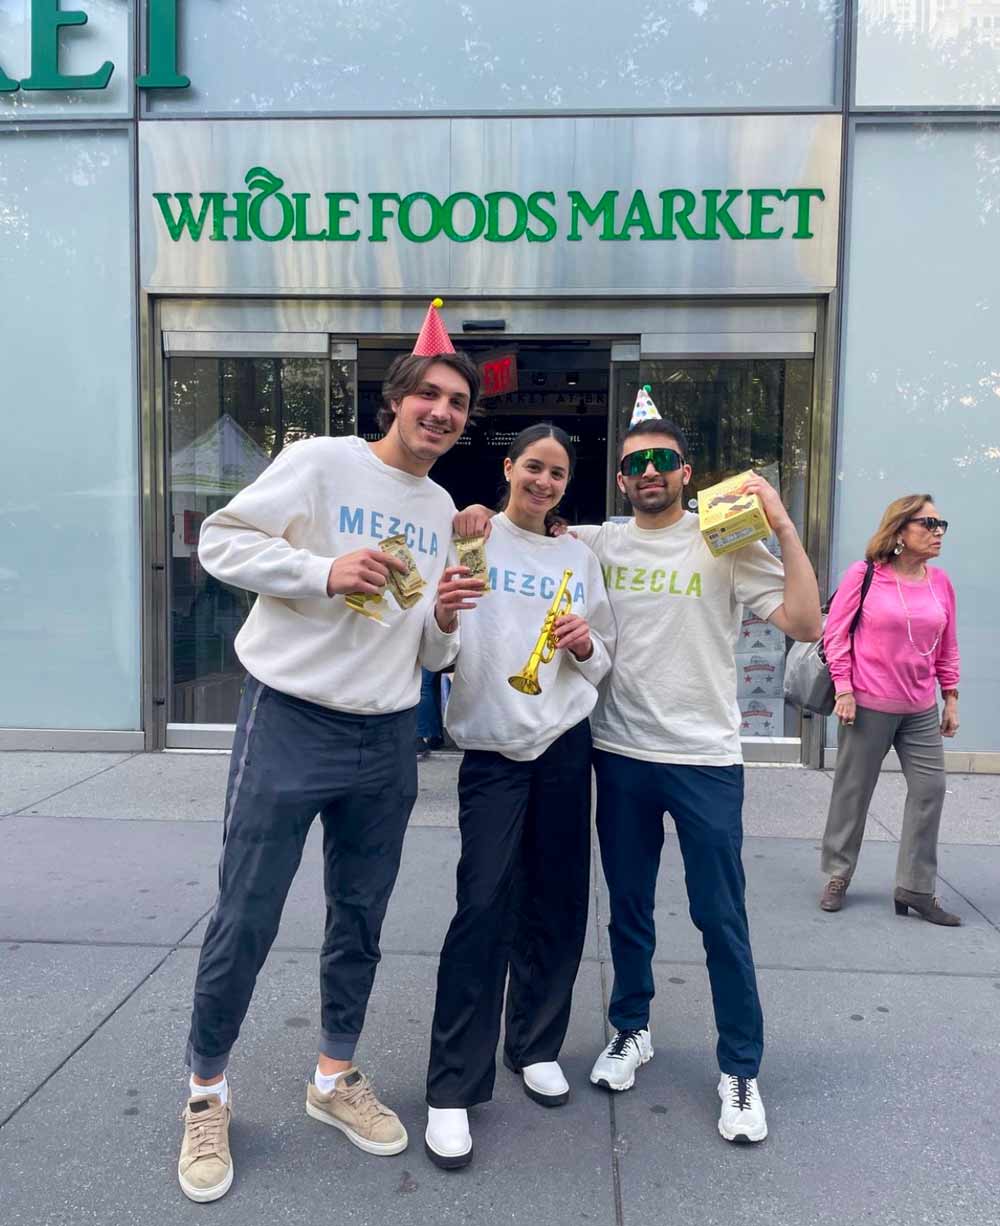 Griffin Spolansky standing outside a Whole Foods with Mezcla bars and a couple friends